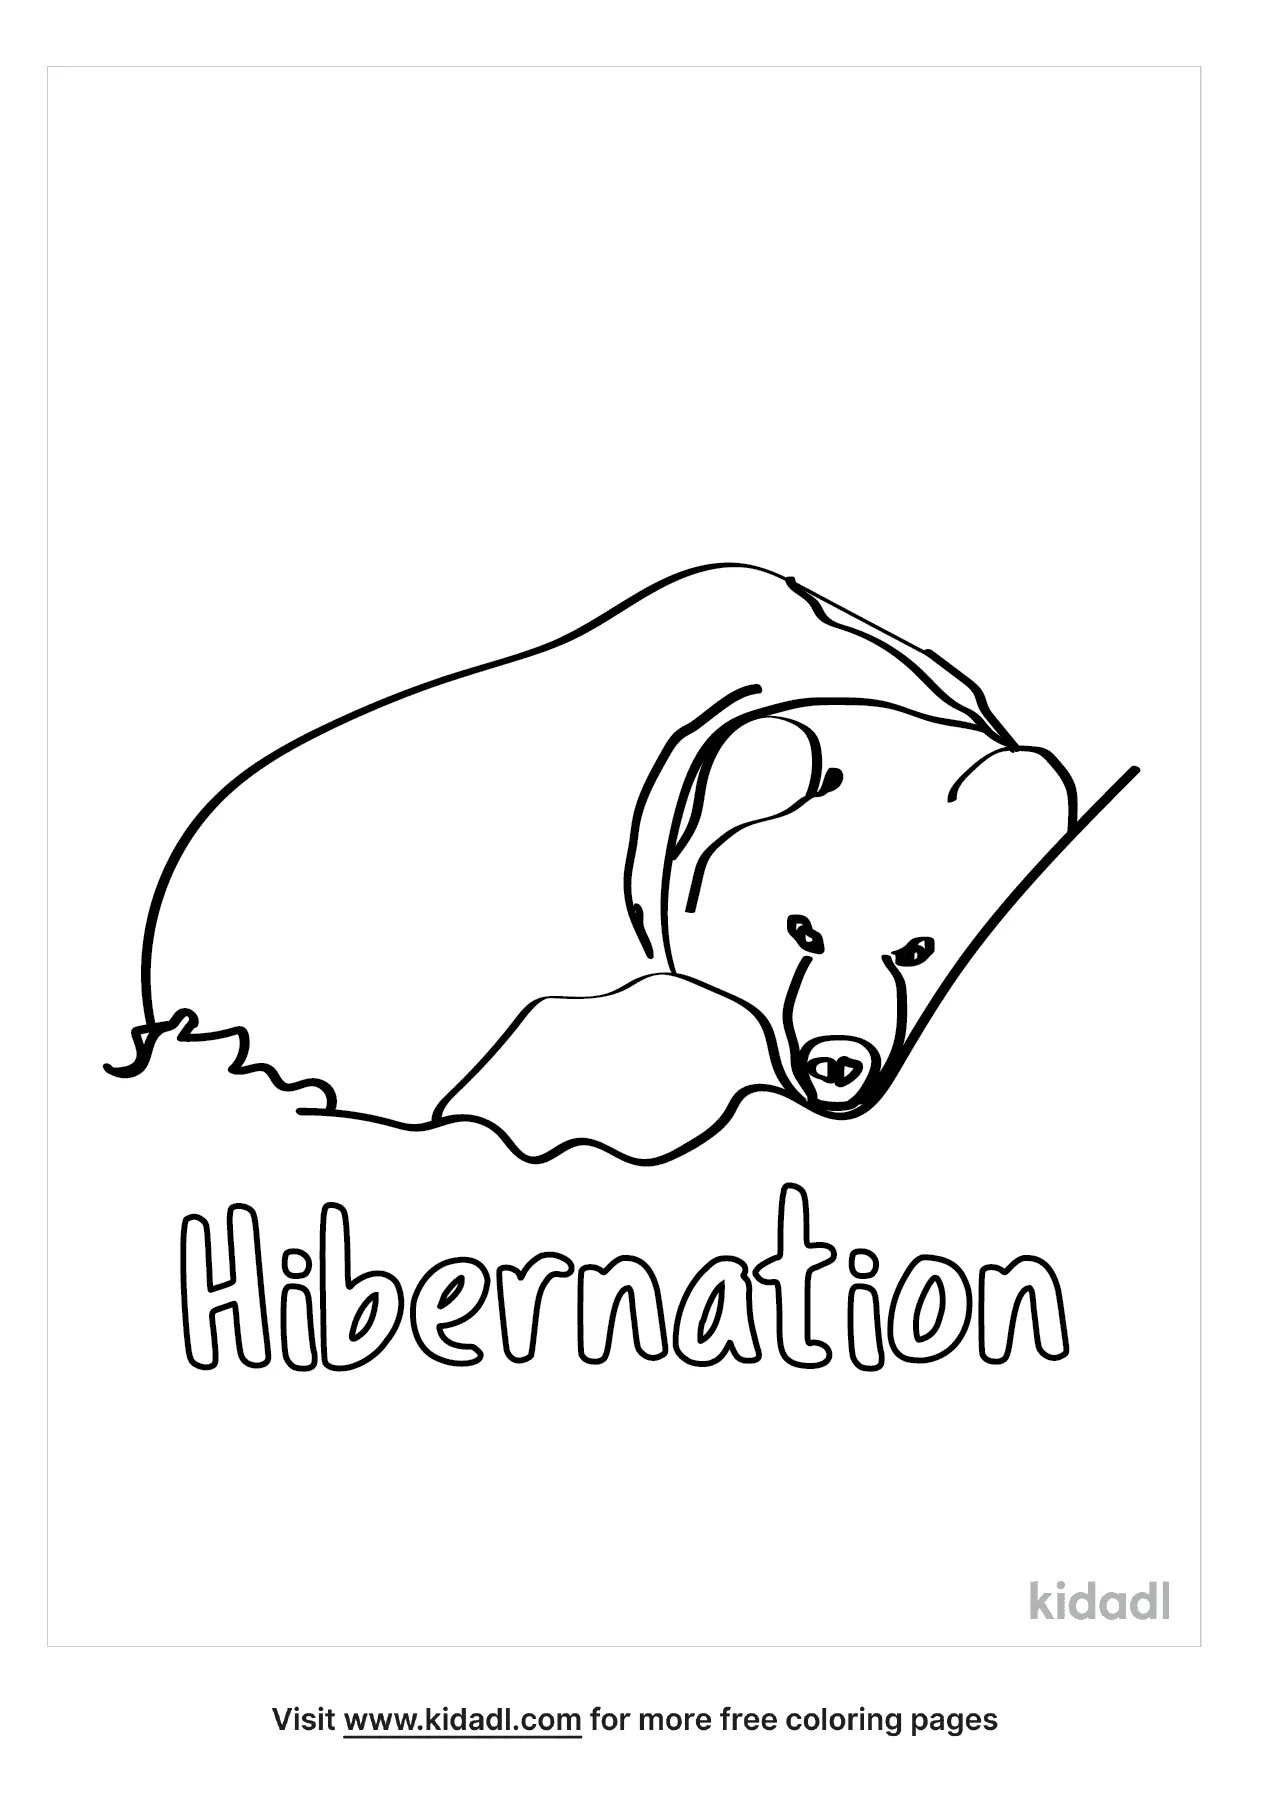 Hibernation Coloring Pages   Free Animals Coloring Pages   Kidadl